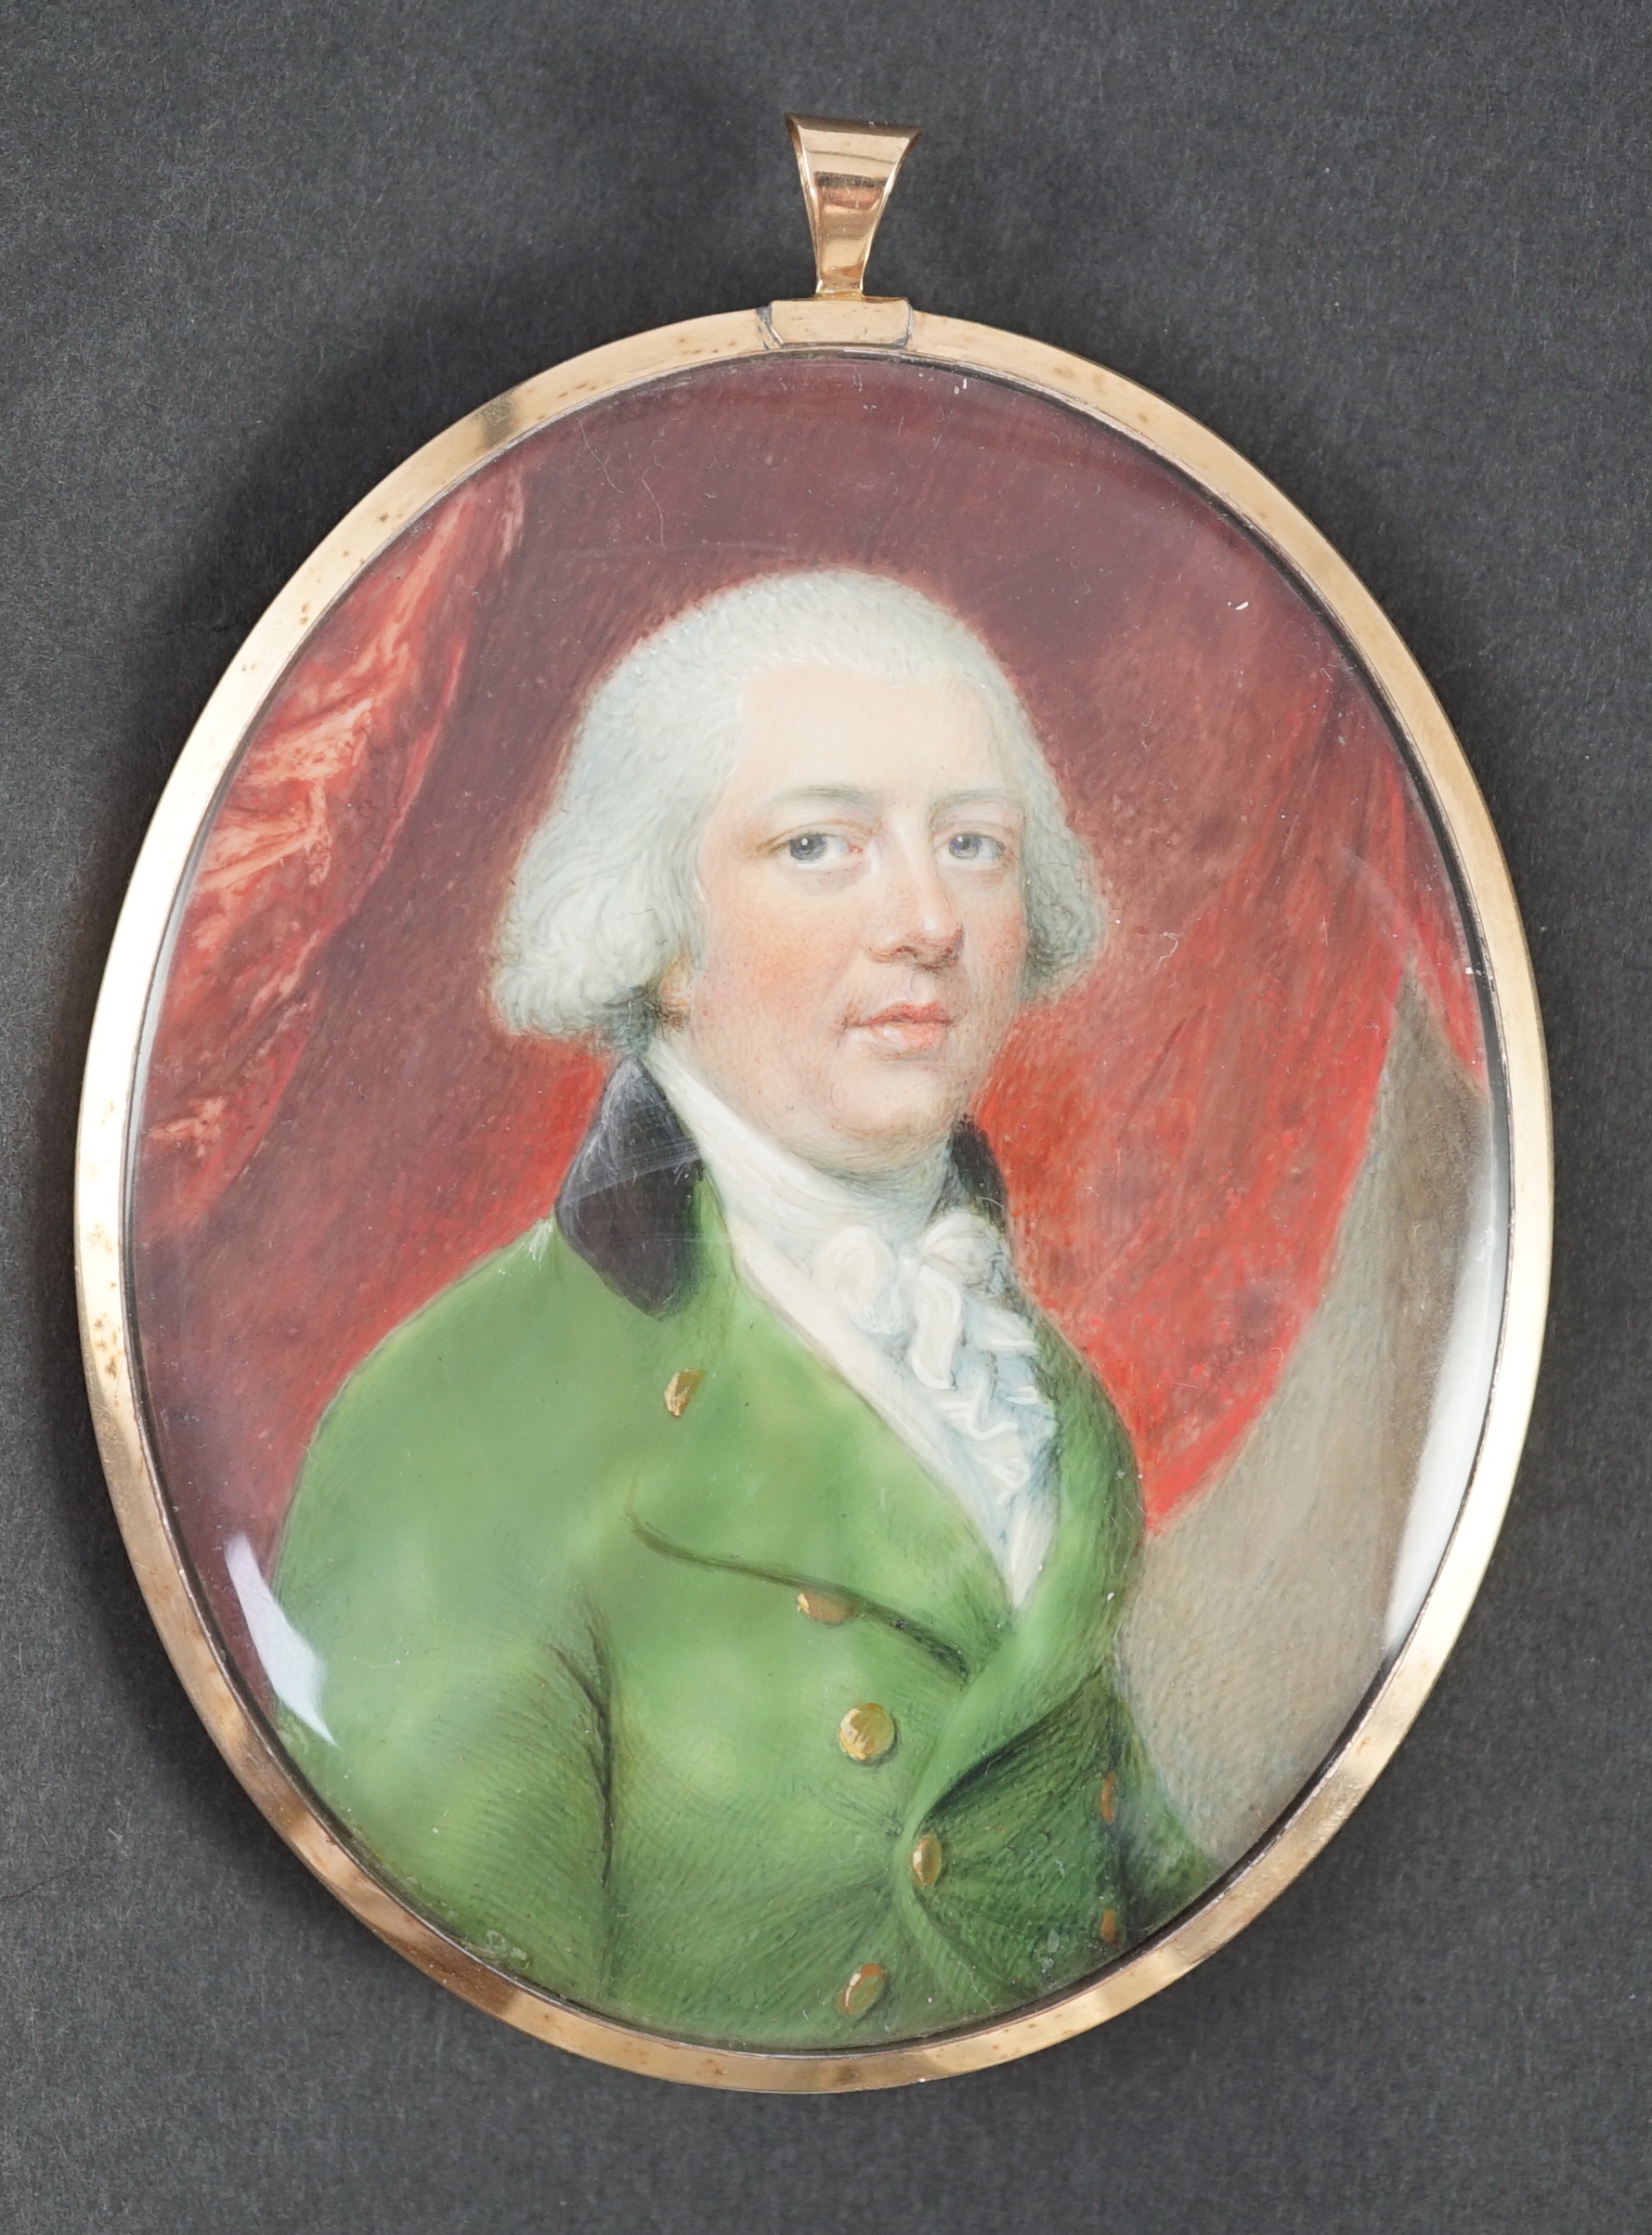 John Barry (fl.1784-1817), Portrait miniature of a gentleman, watercolour on ivory, 9.3 x 7.5cm. CITES Submission reference QWTJQ3Y5